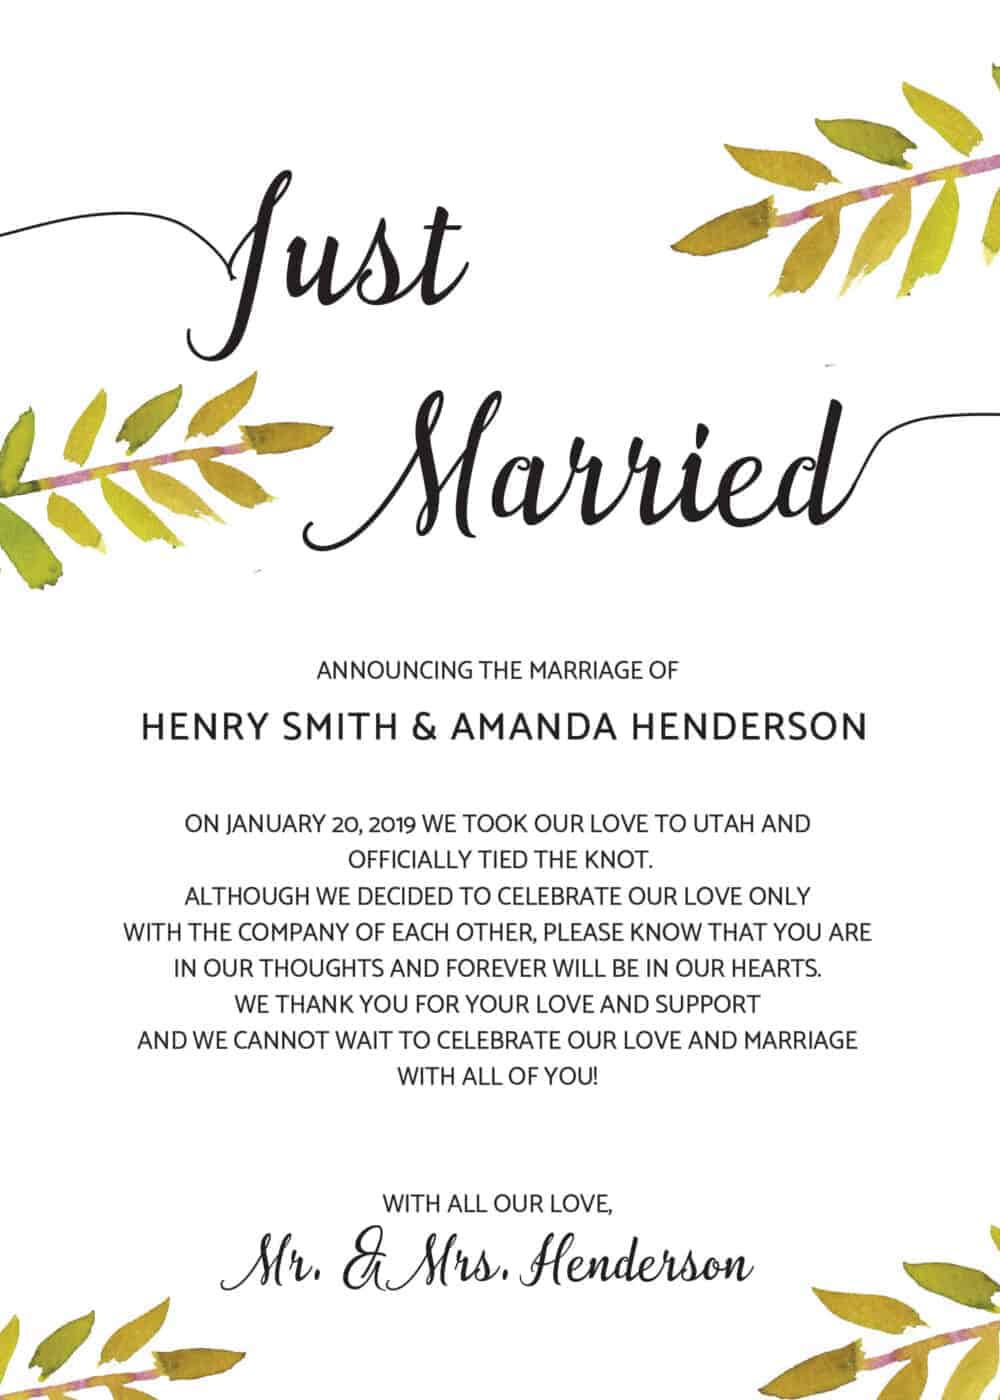 Just Married Elopement Announcement Cards with Leaves & Branches elopement124